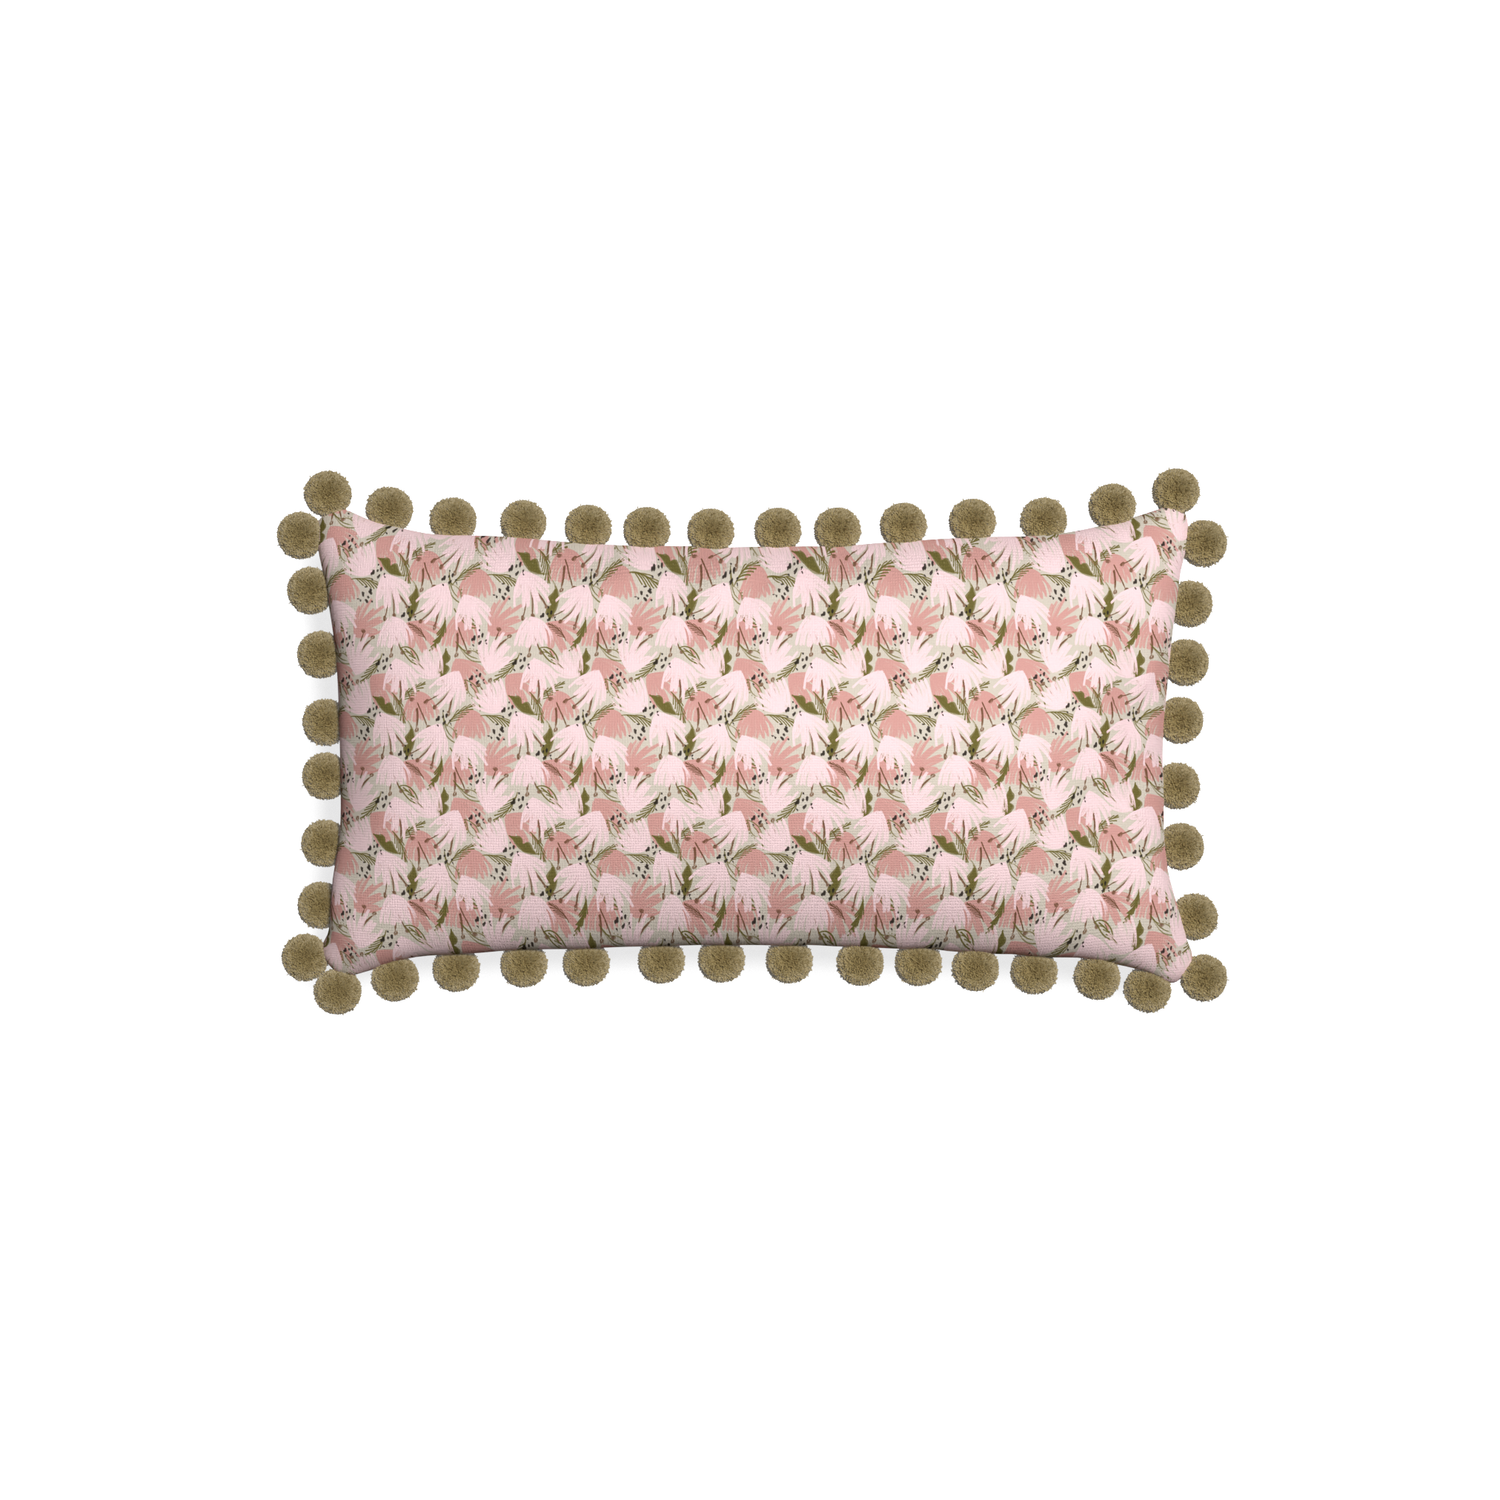 Petite-lumbar eden pink custom pink floralpillow with olive pom pom on white background